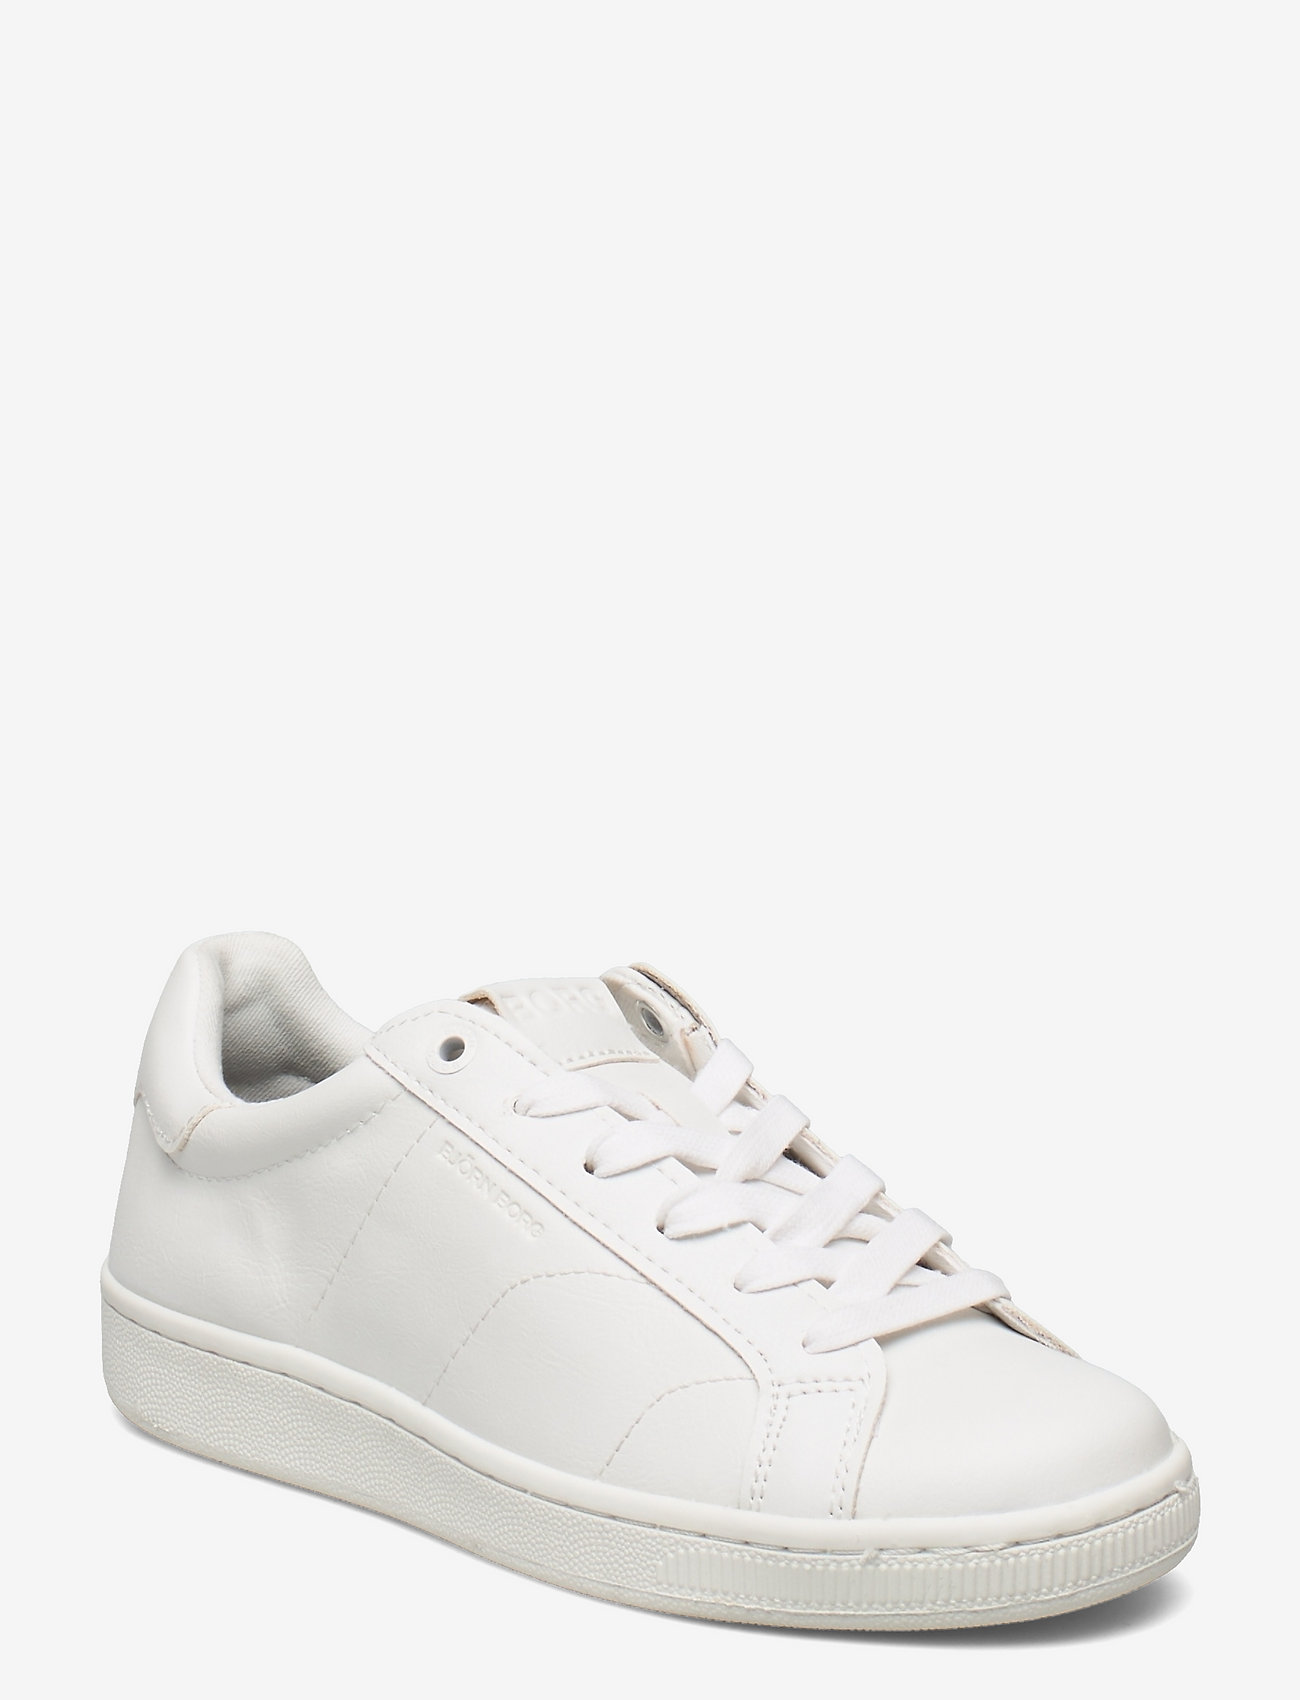 Björn Borg - T305 CLS BTM T - lave sneakers - white - 0